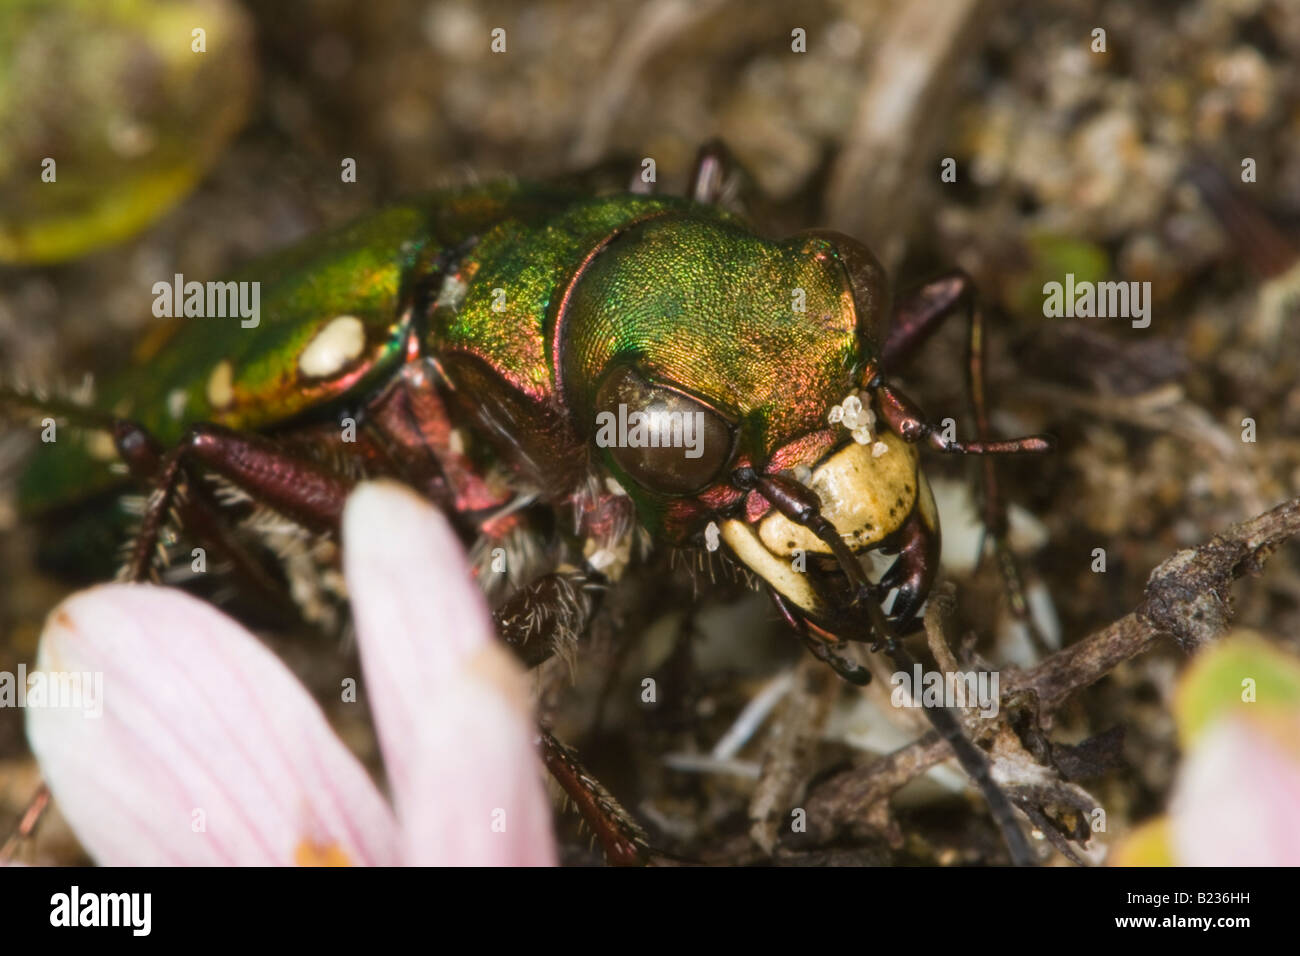 close-up of the head of a Green Tiger Beetle (Cicindela campestris) Stock Photo